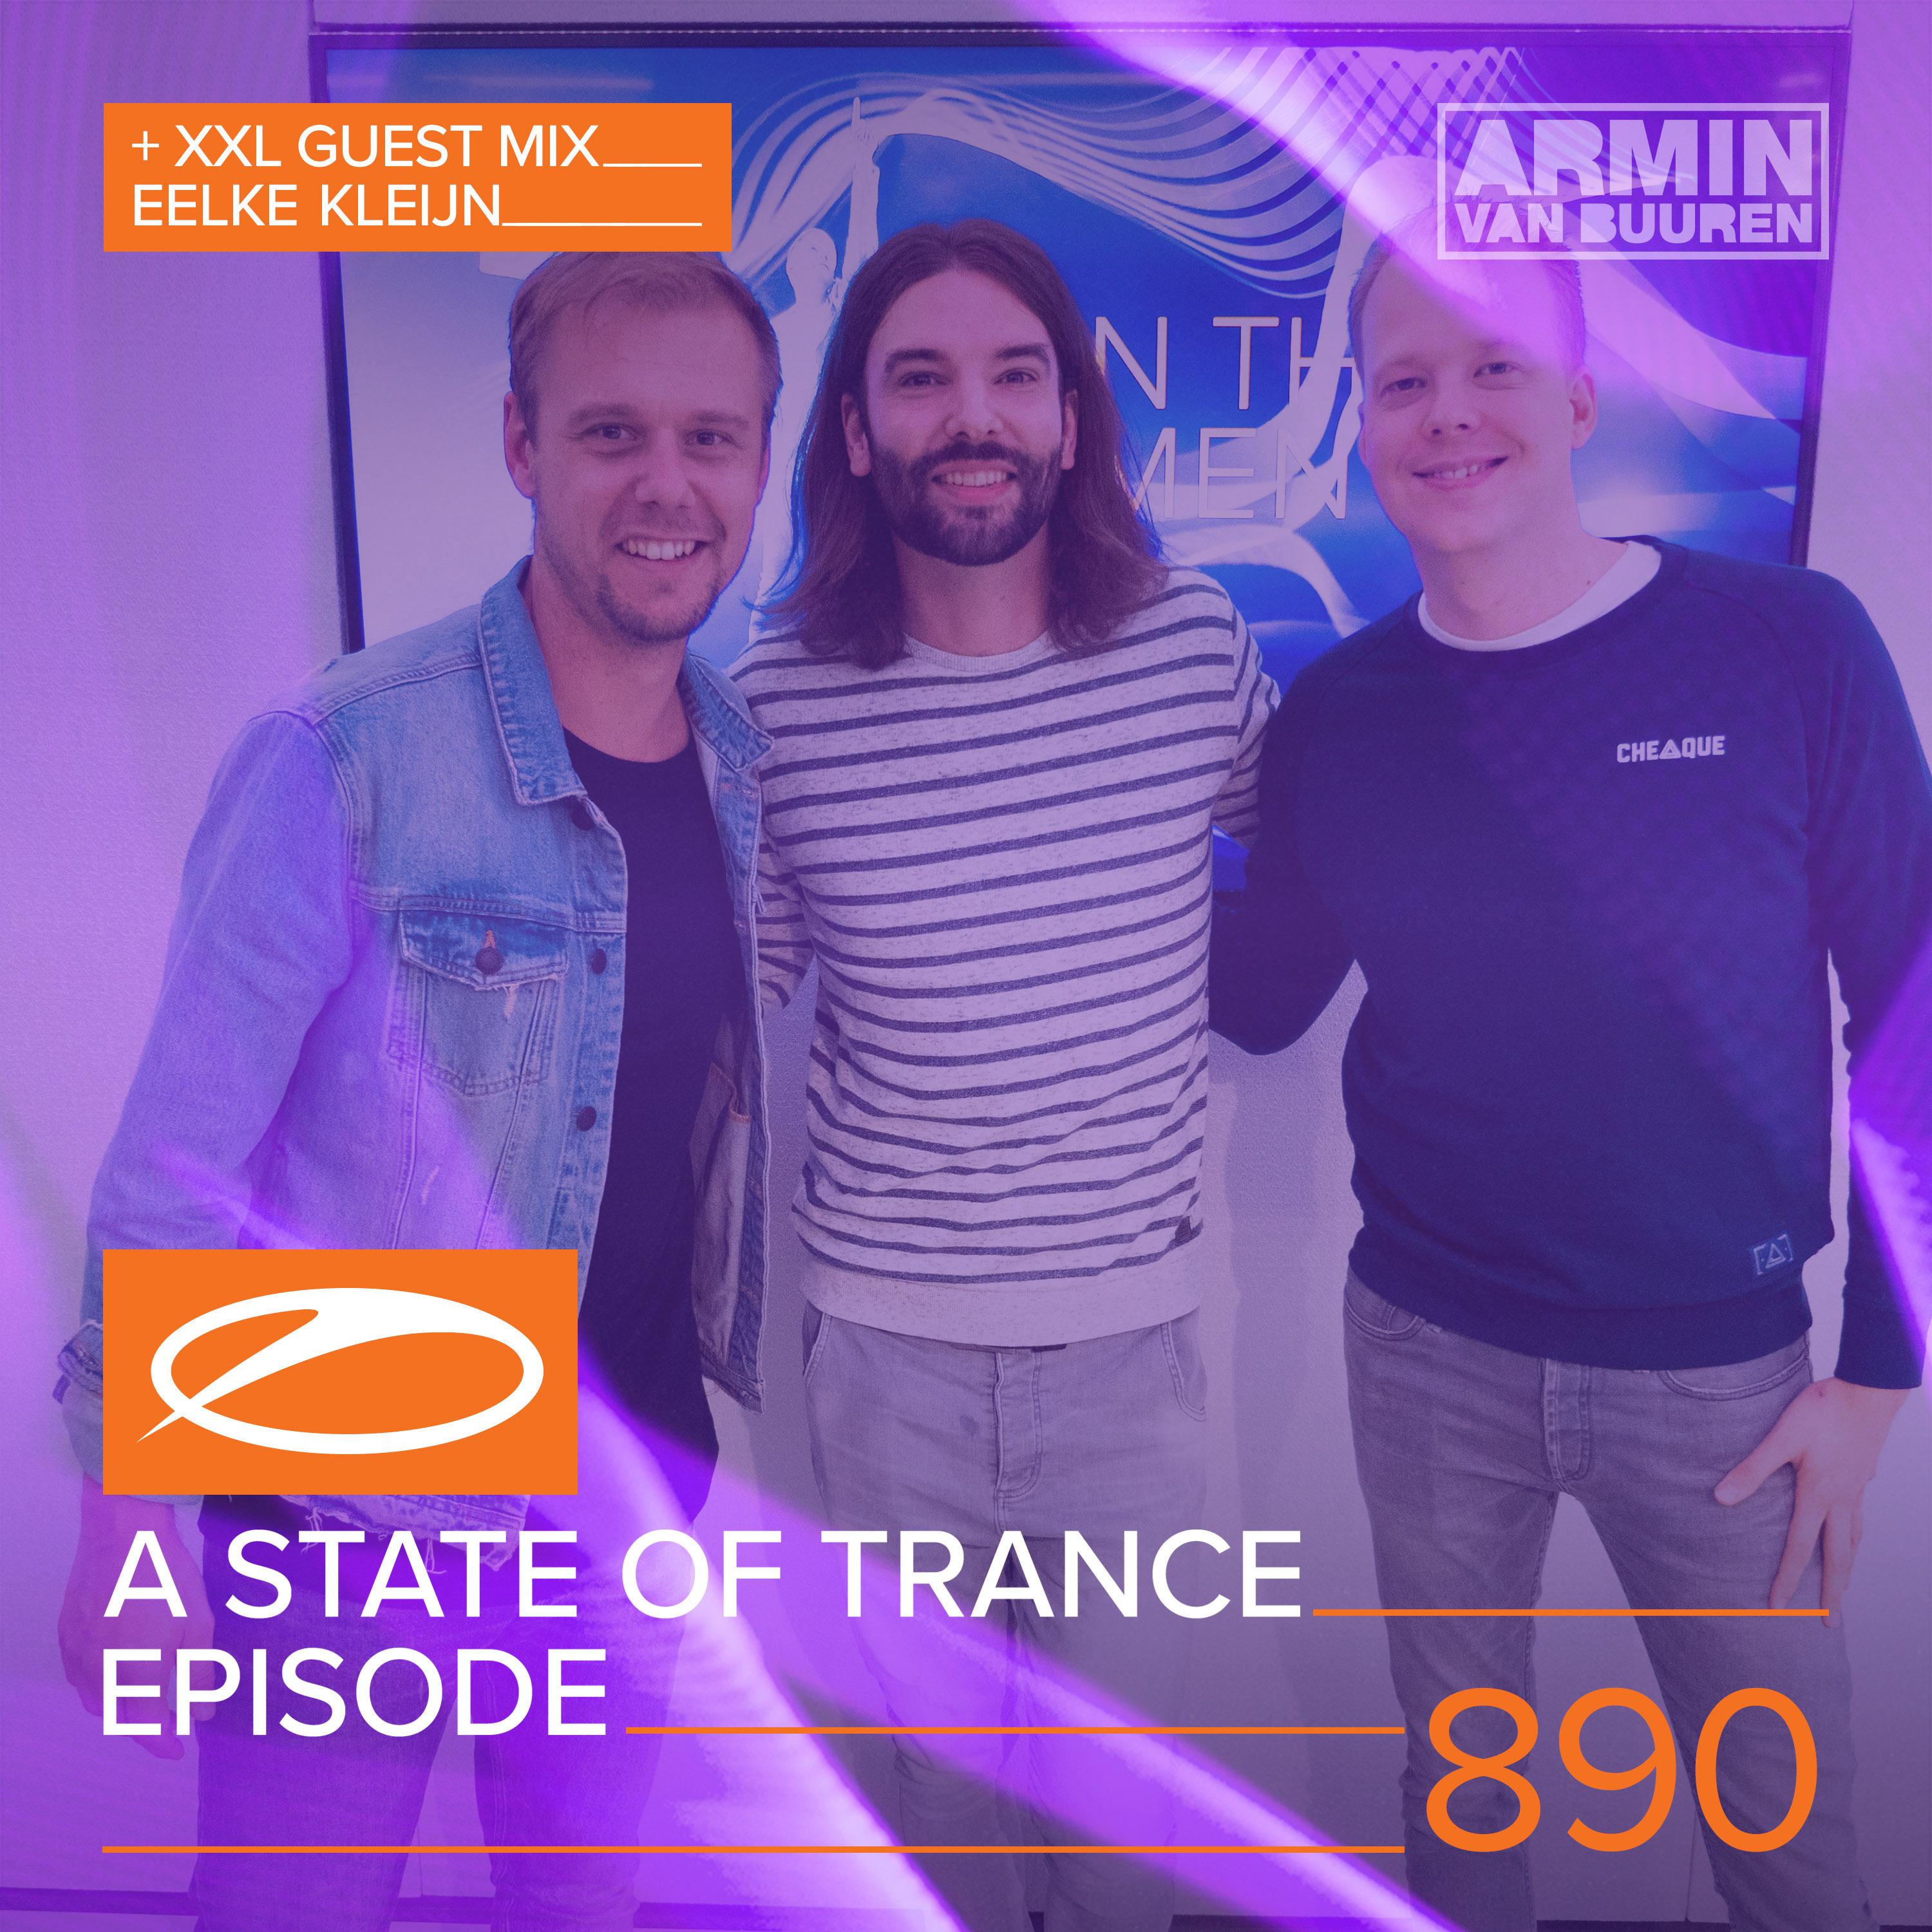 A State Of Trance (ASOT 890) (Intro XXL Guest Mix: Eelke Kleijn)